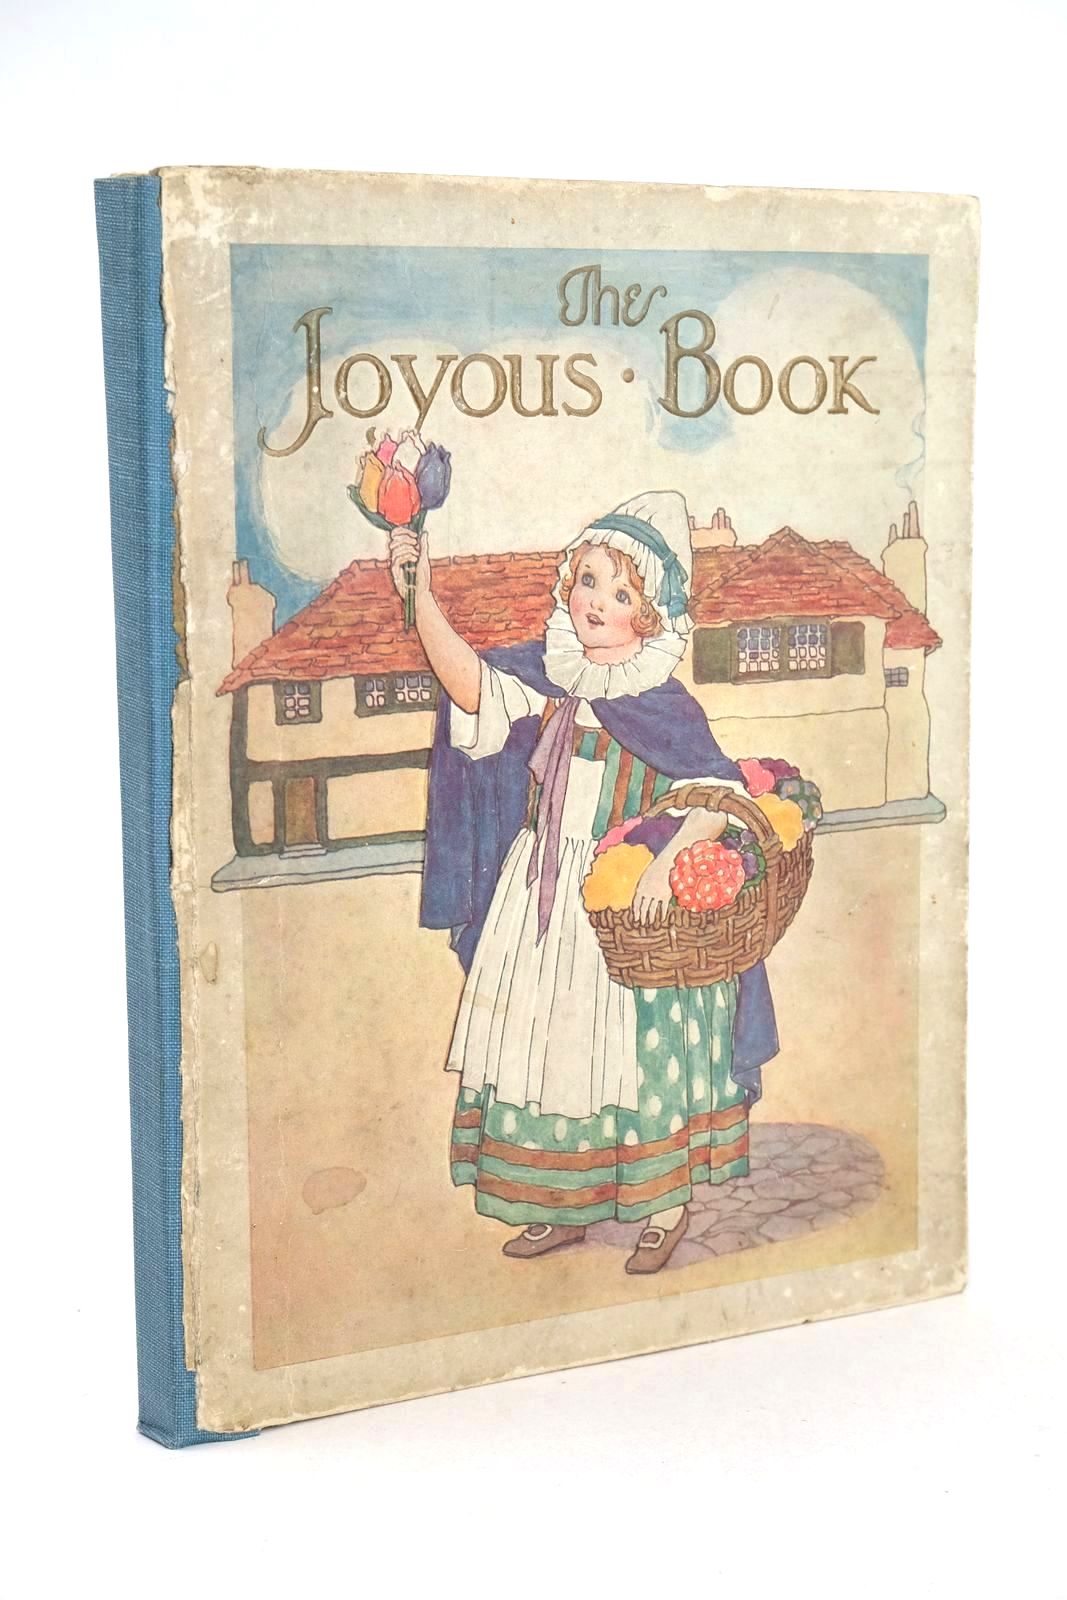 Photo of THE JOYOUS BOOK written by Joan, Natalie illustrated by Sowerby, Millicent published by Oxford University Press, Humphrey Milford (STOCK CODE: 1325919)  for sale by Stella & Rose's Books